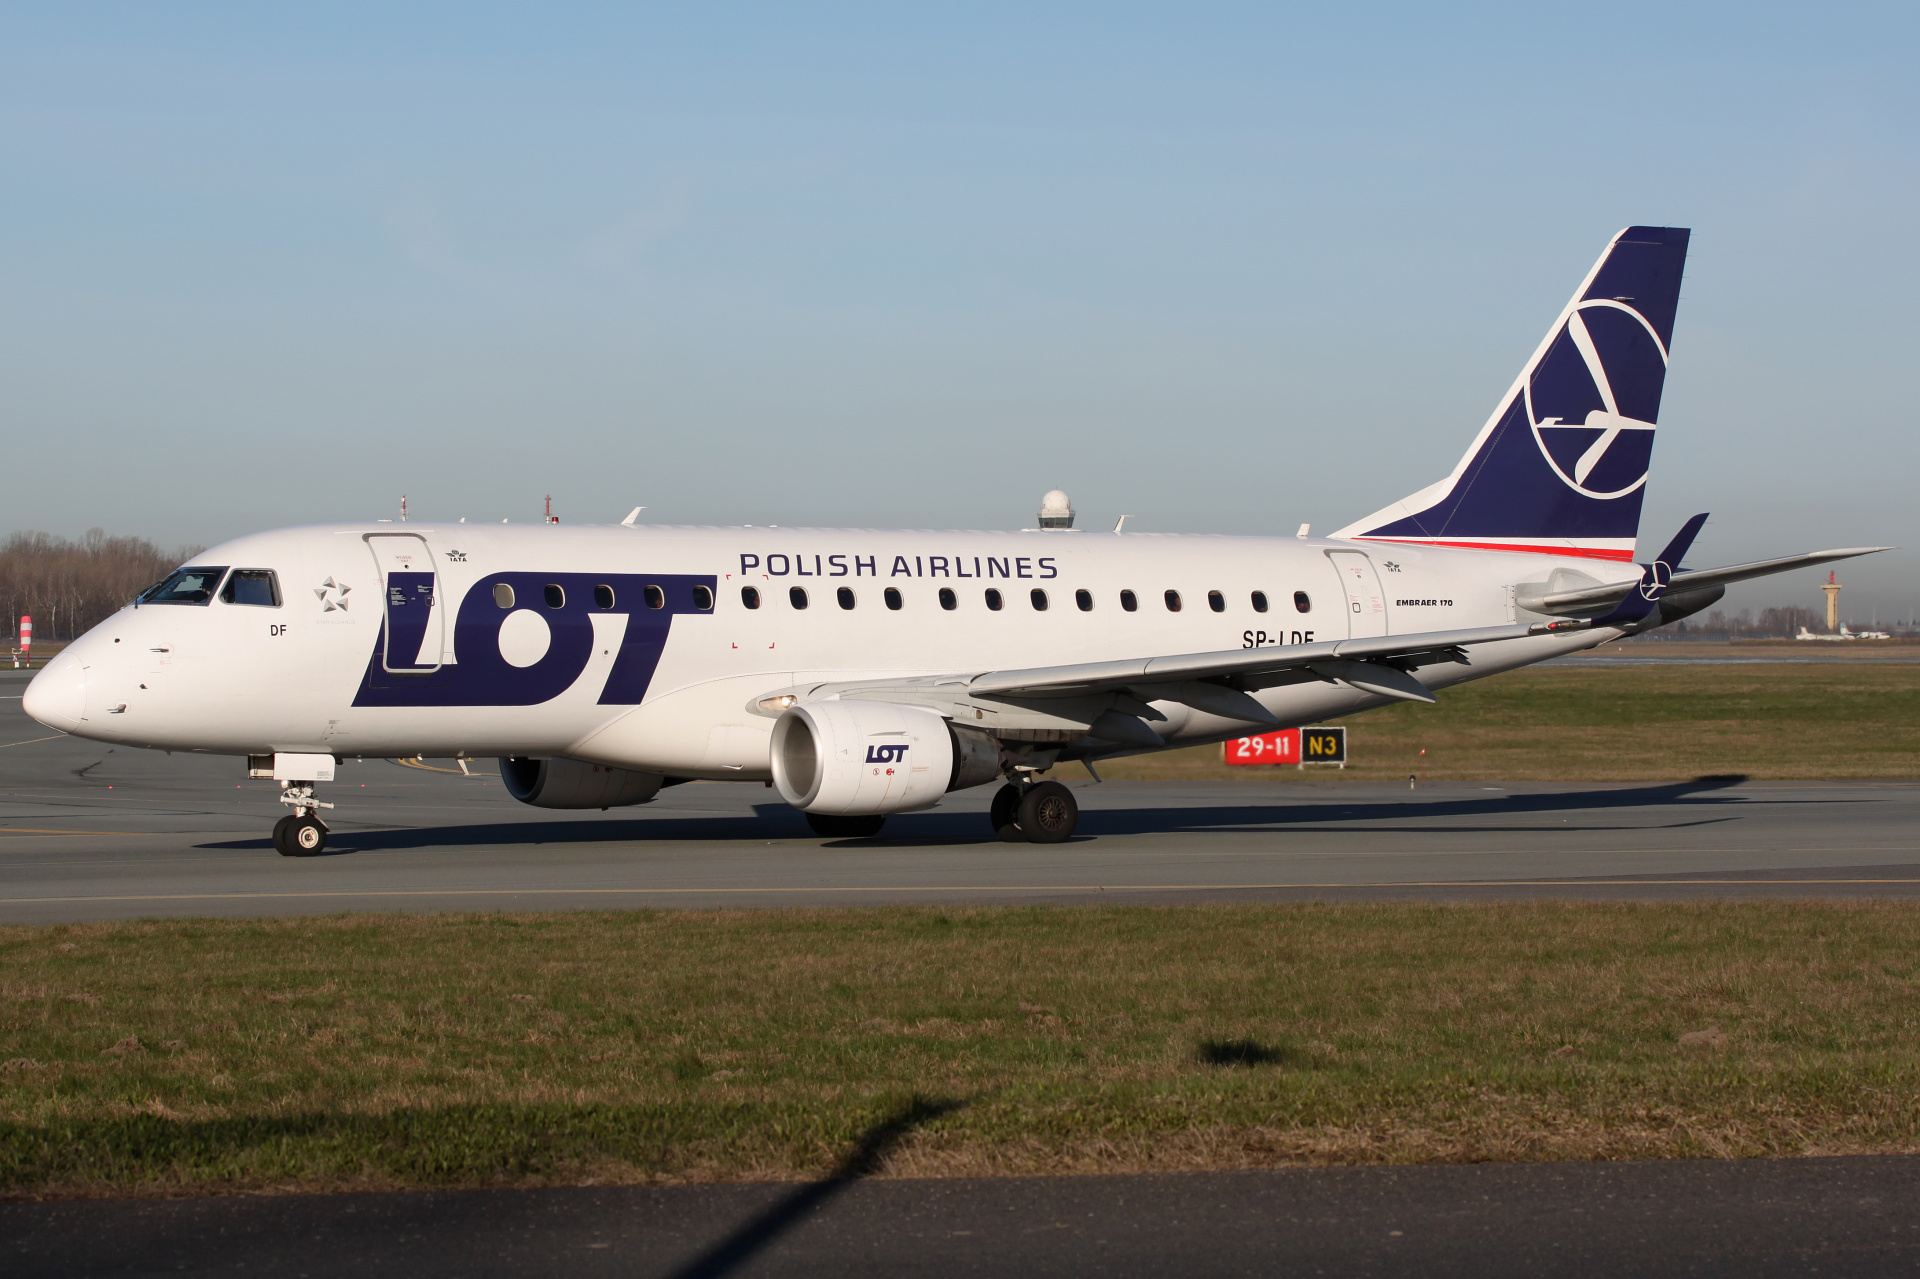 SP-LDF (new livery) (Aircraft » EPWA Spotting » Embraer E170 » LOT Polish Airlines)